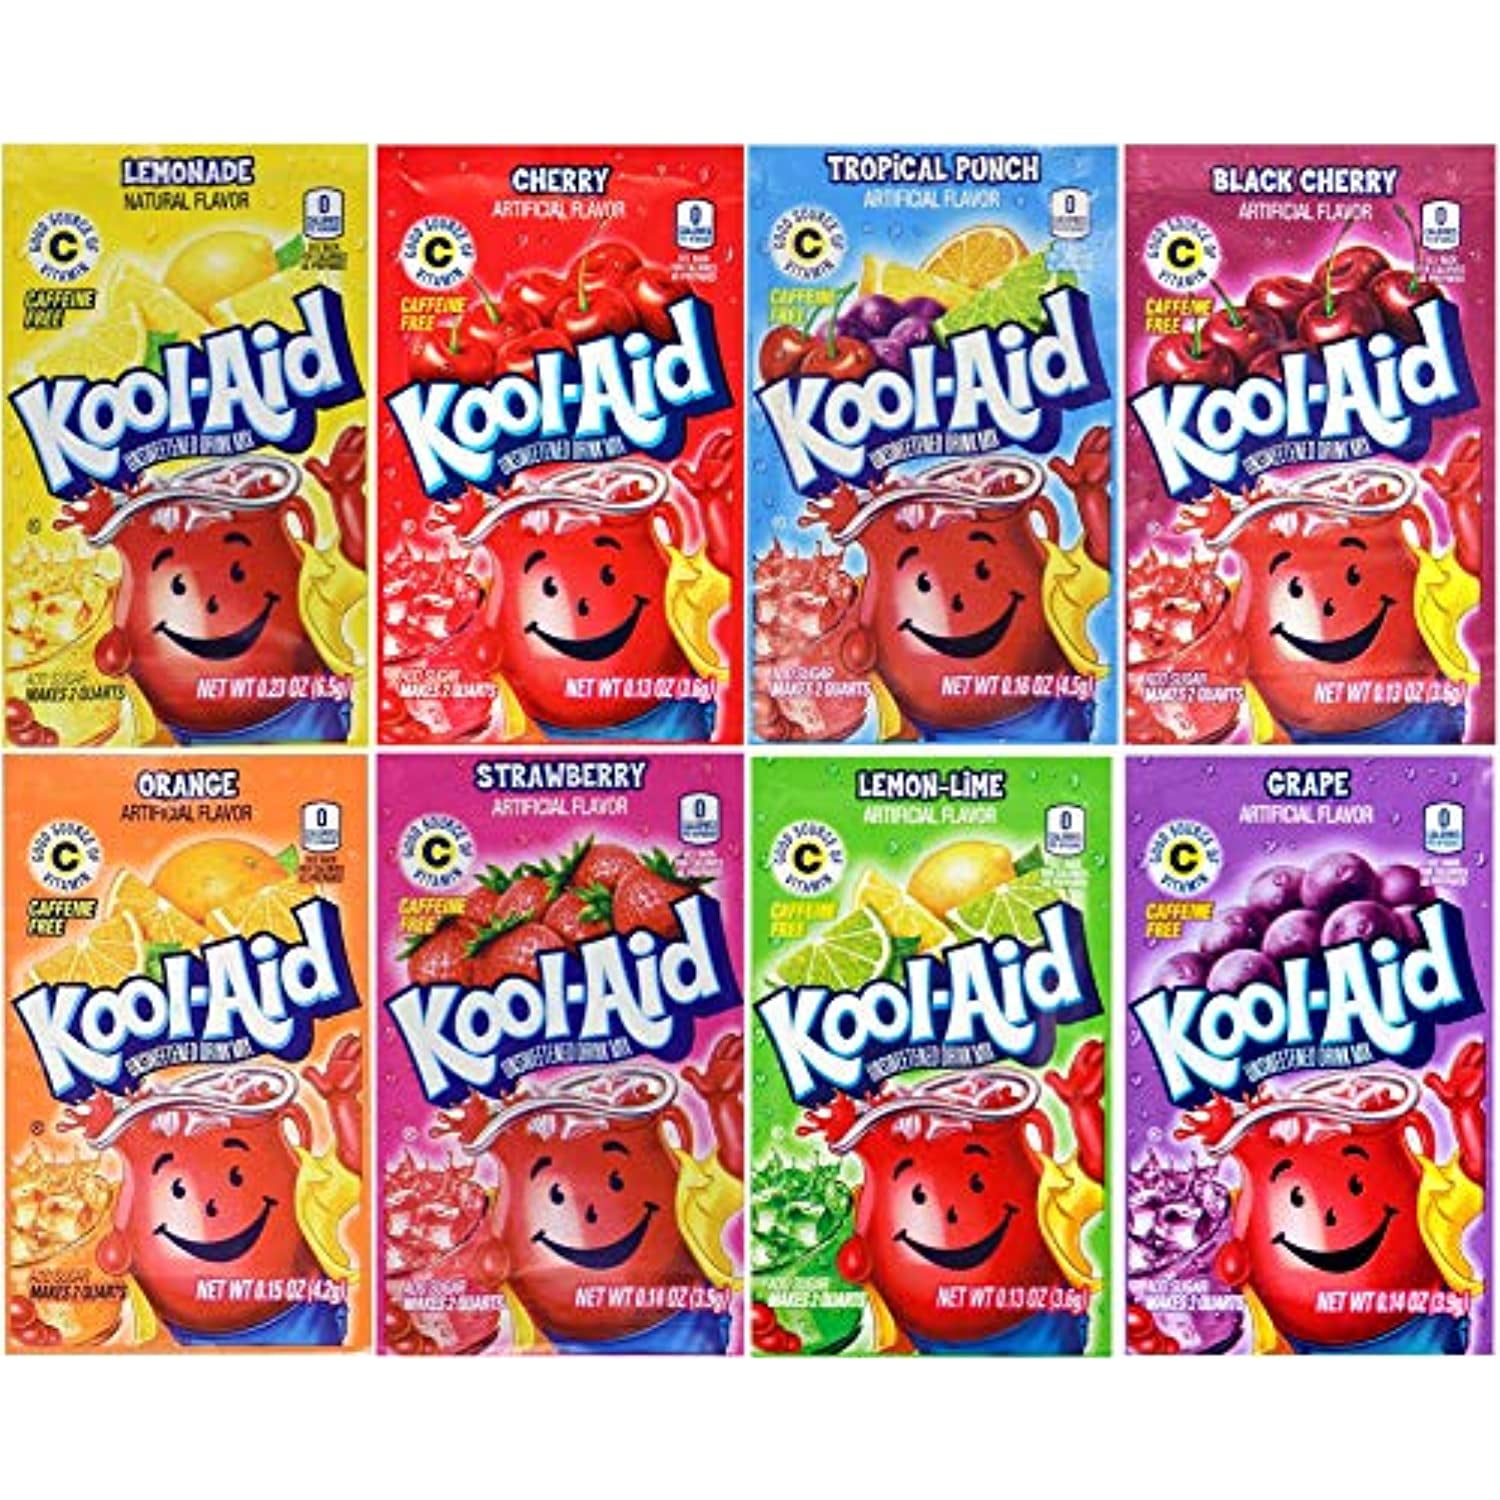 Kool-Aid Drink Mix, 8 Flavors Variety Pack, 48 Packets